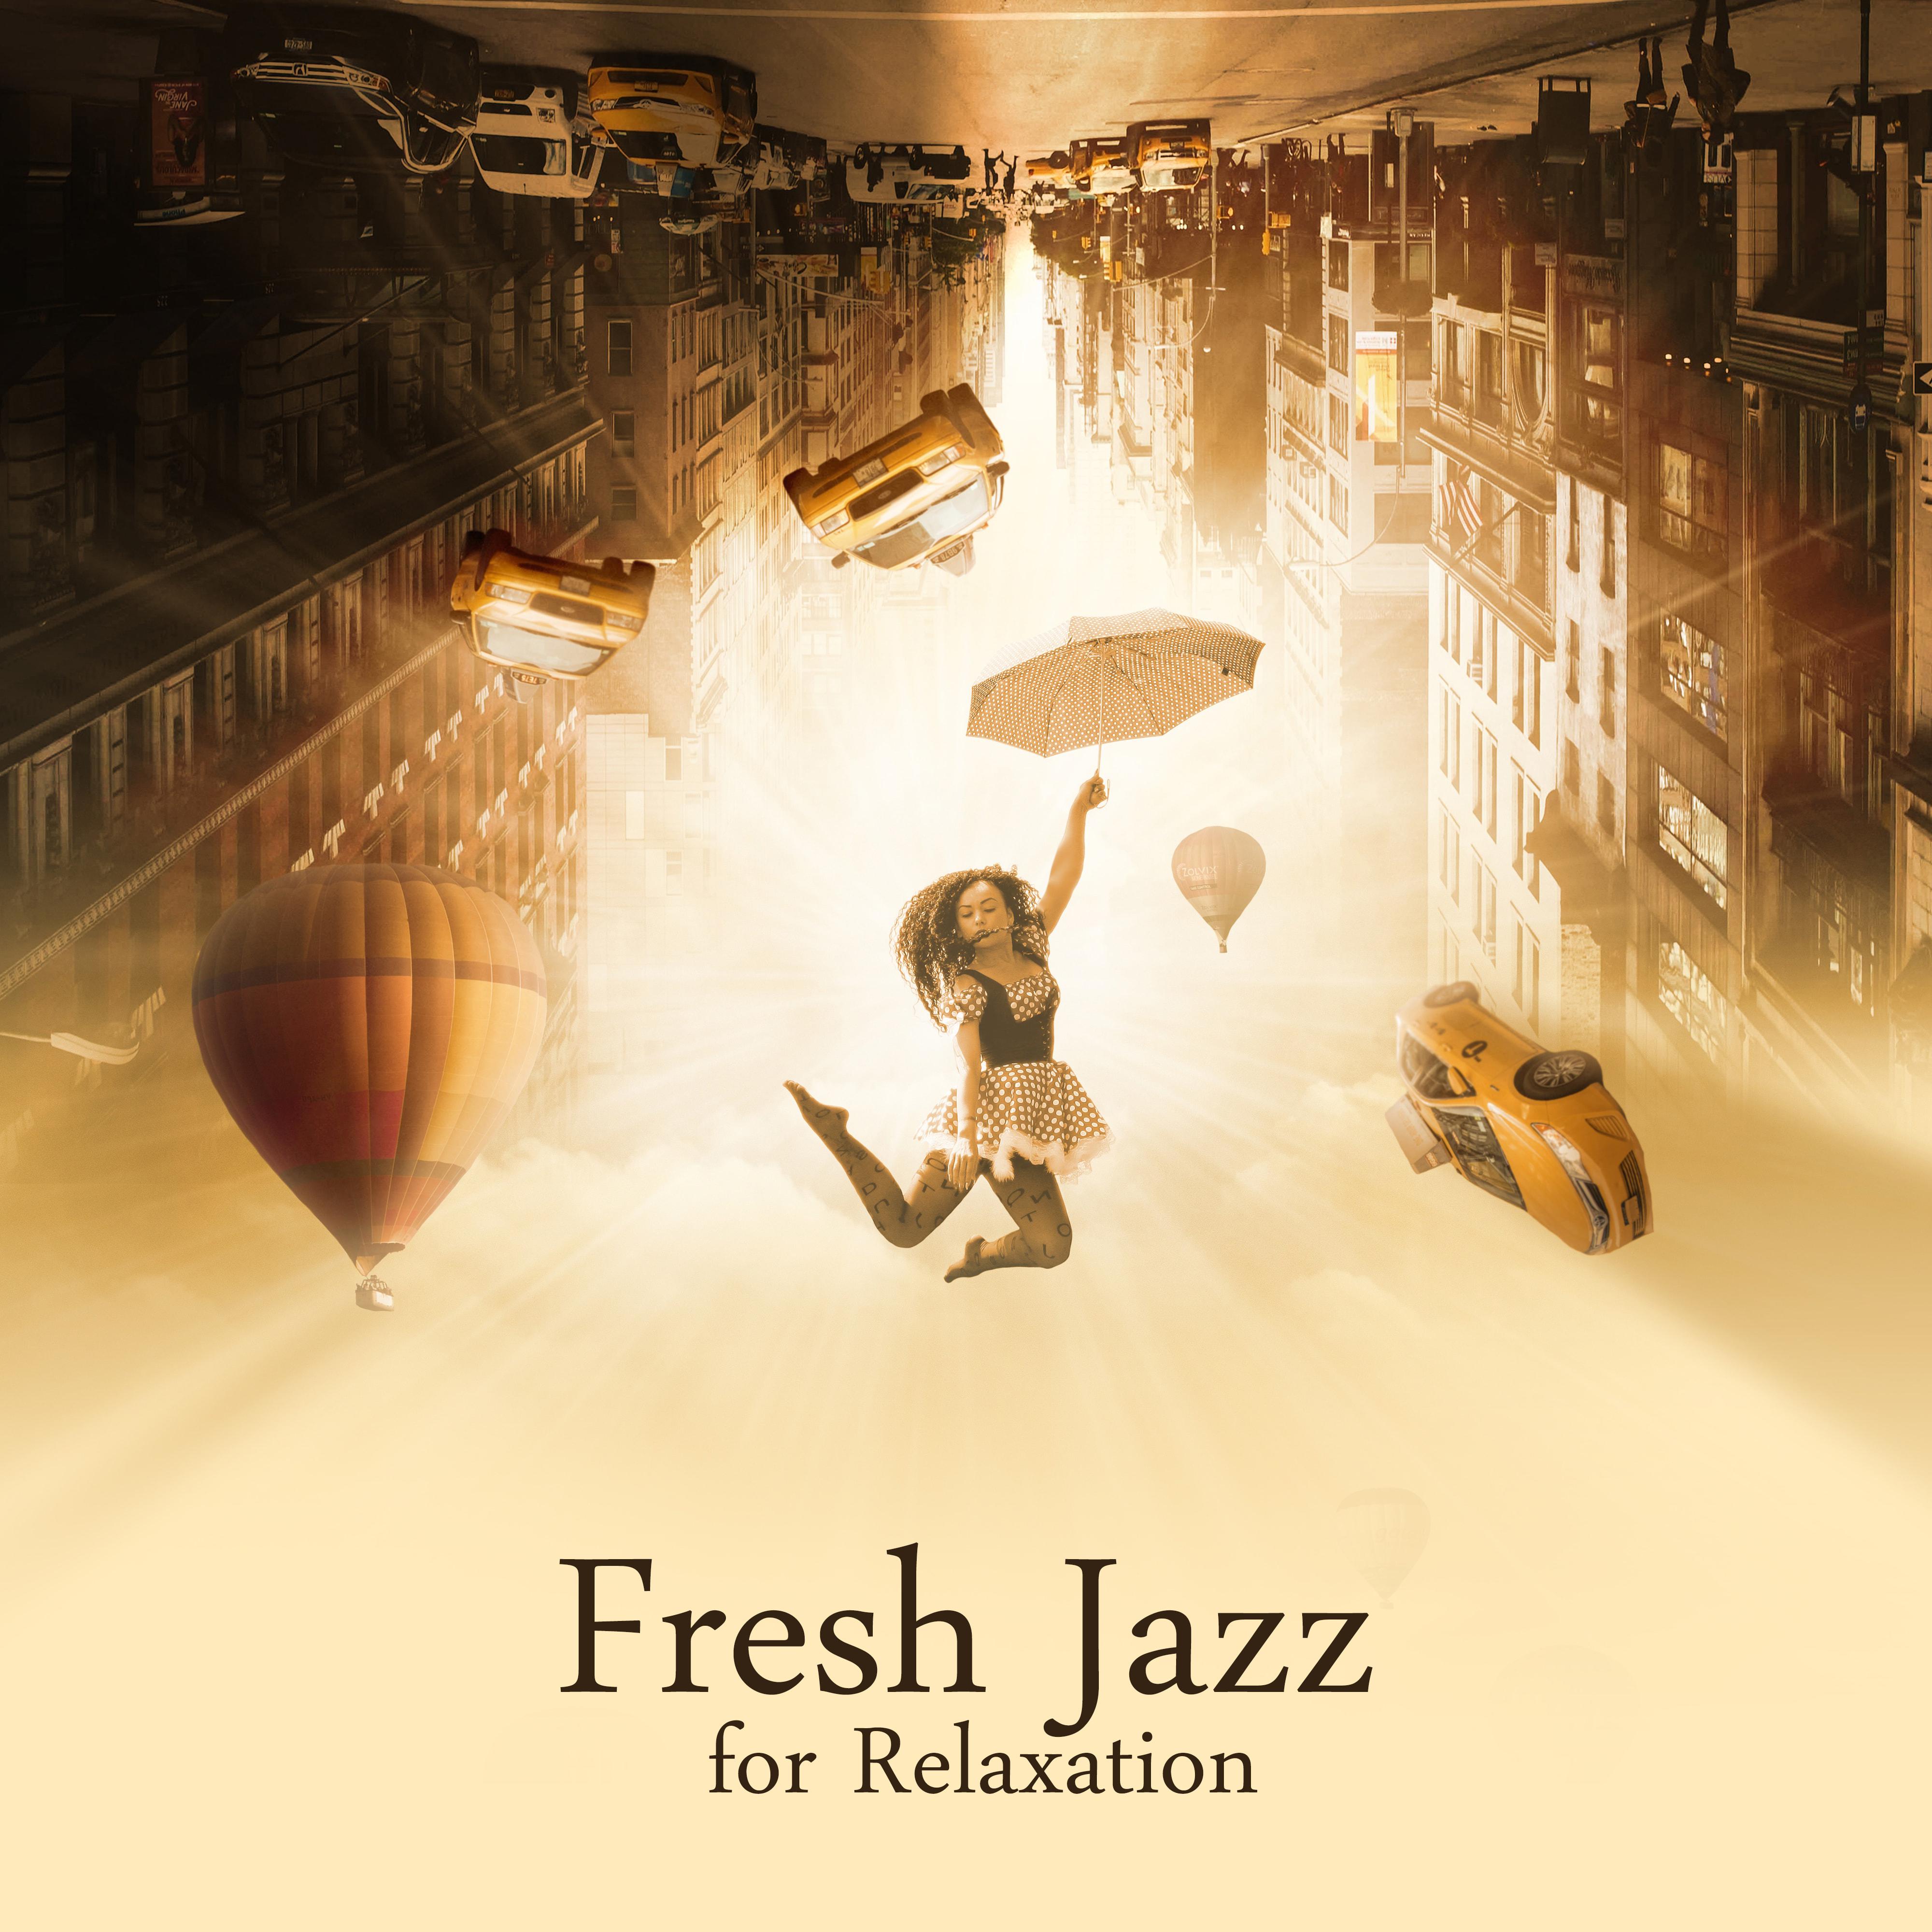 Fresh Jazz for Relaxation